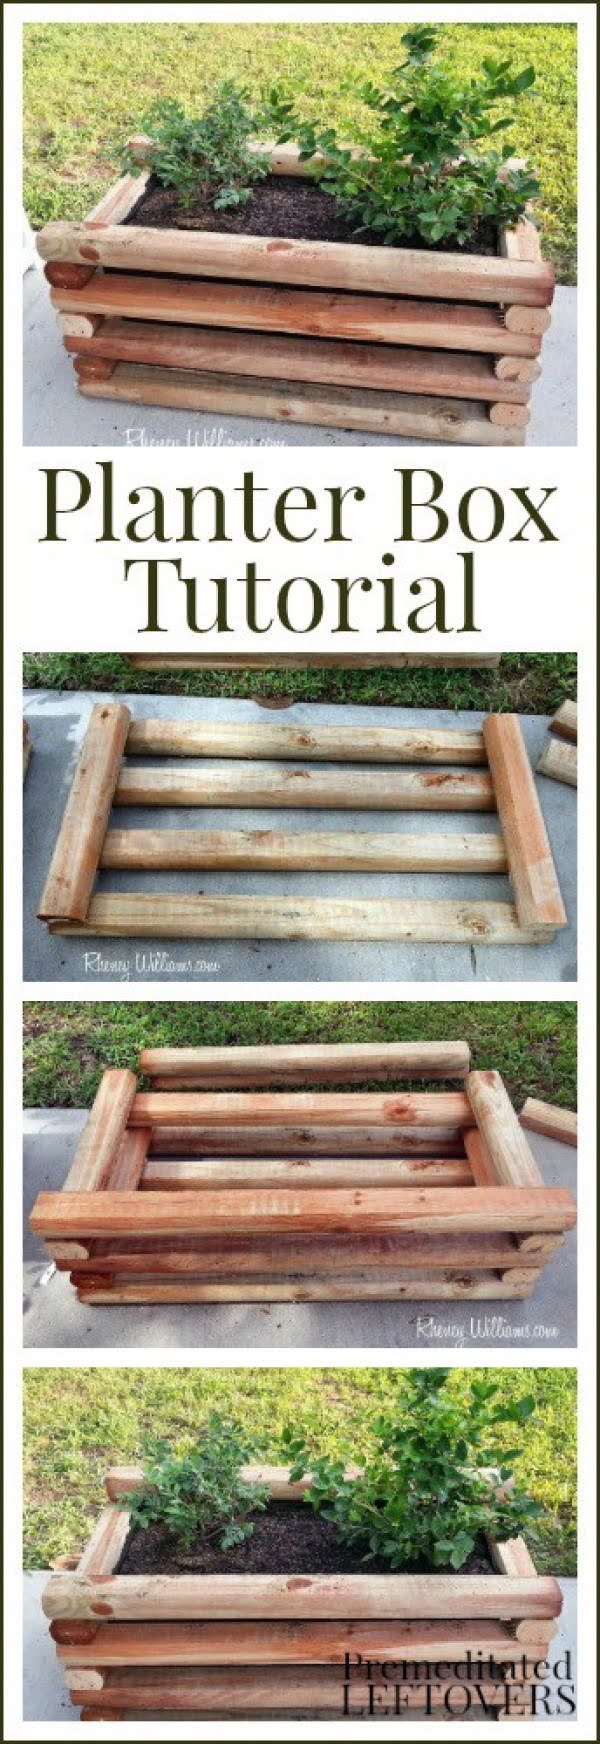 DIY Planter Box for Berries and Other Fruits    